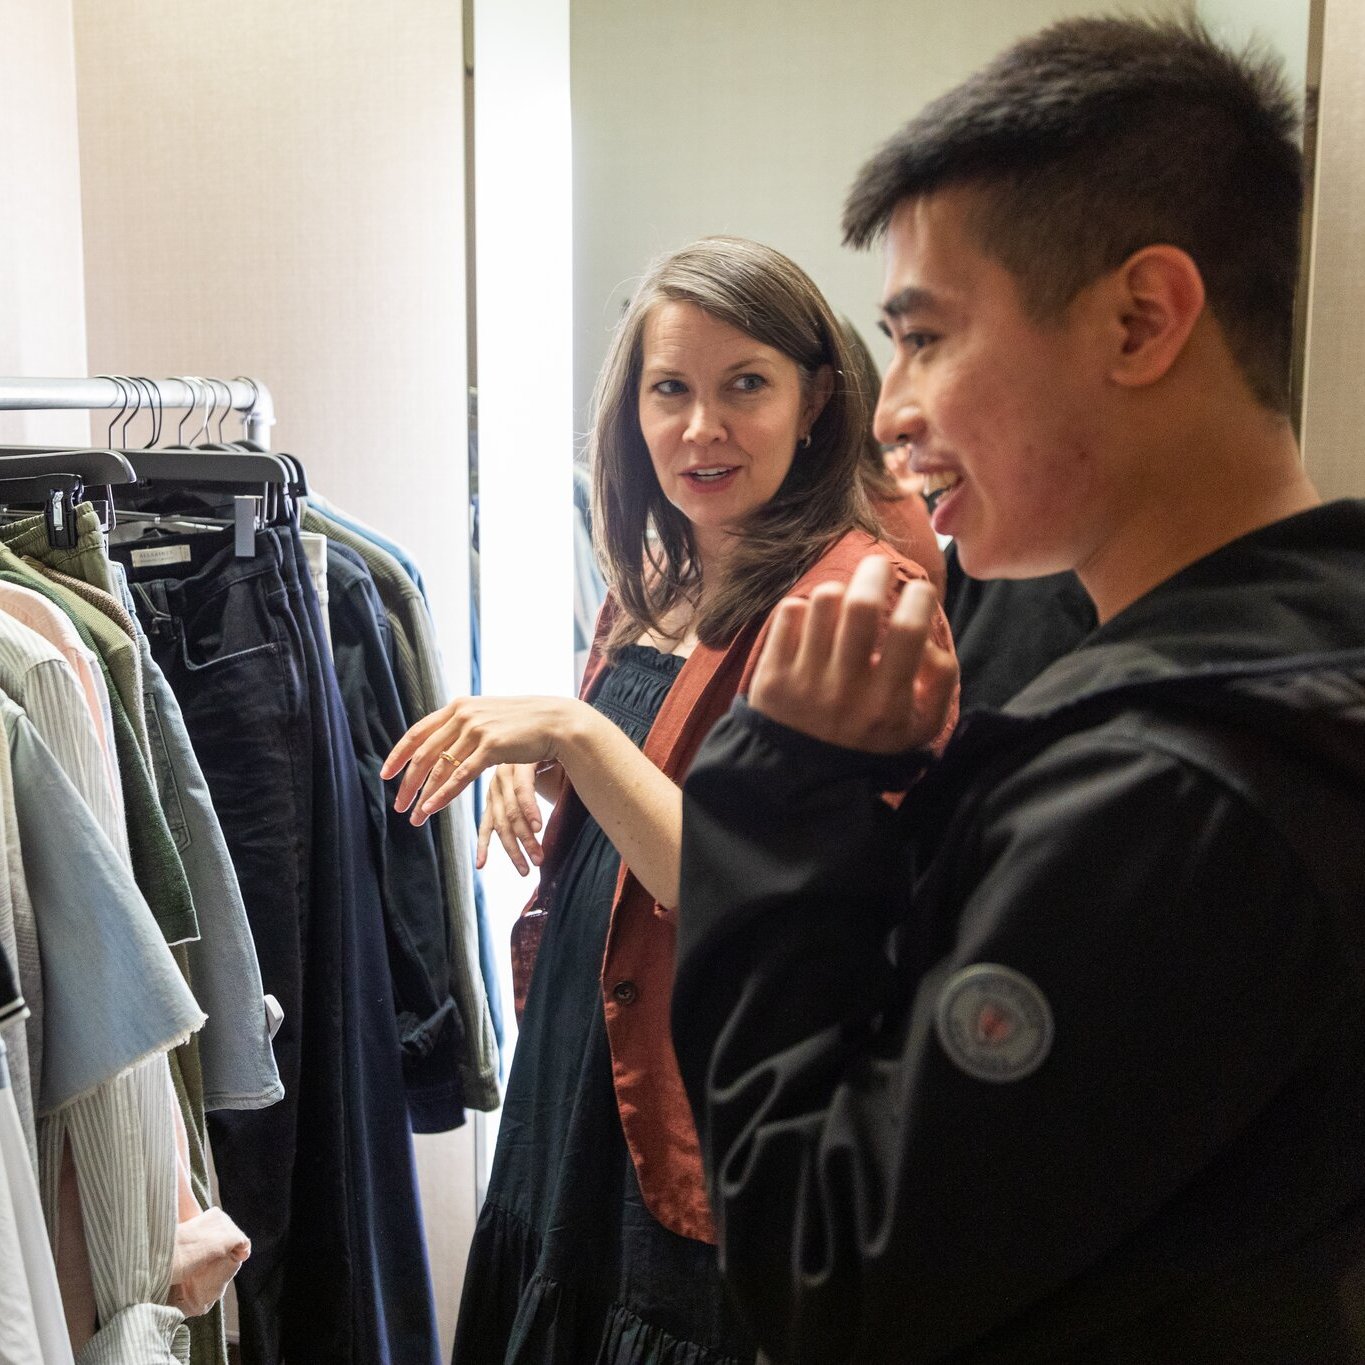 Two people are in a room with a clothing rack full of various garments. They are engaged in conversation, with one gesturing towards the clothes and the other smiling.